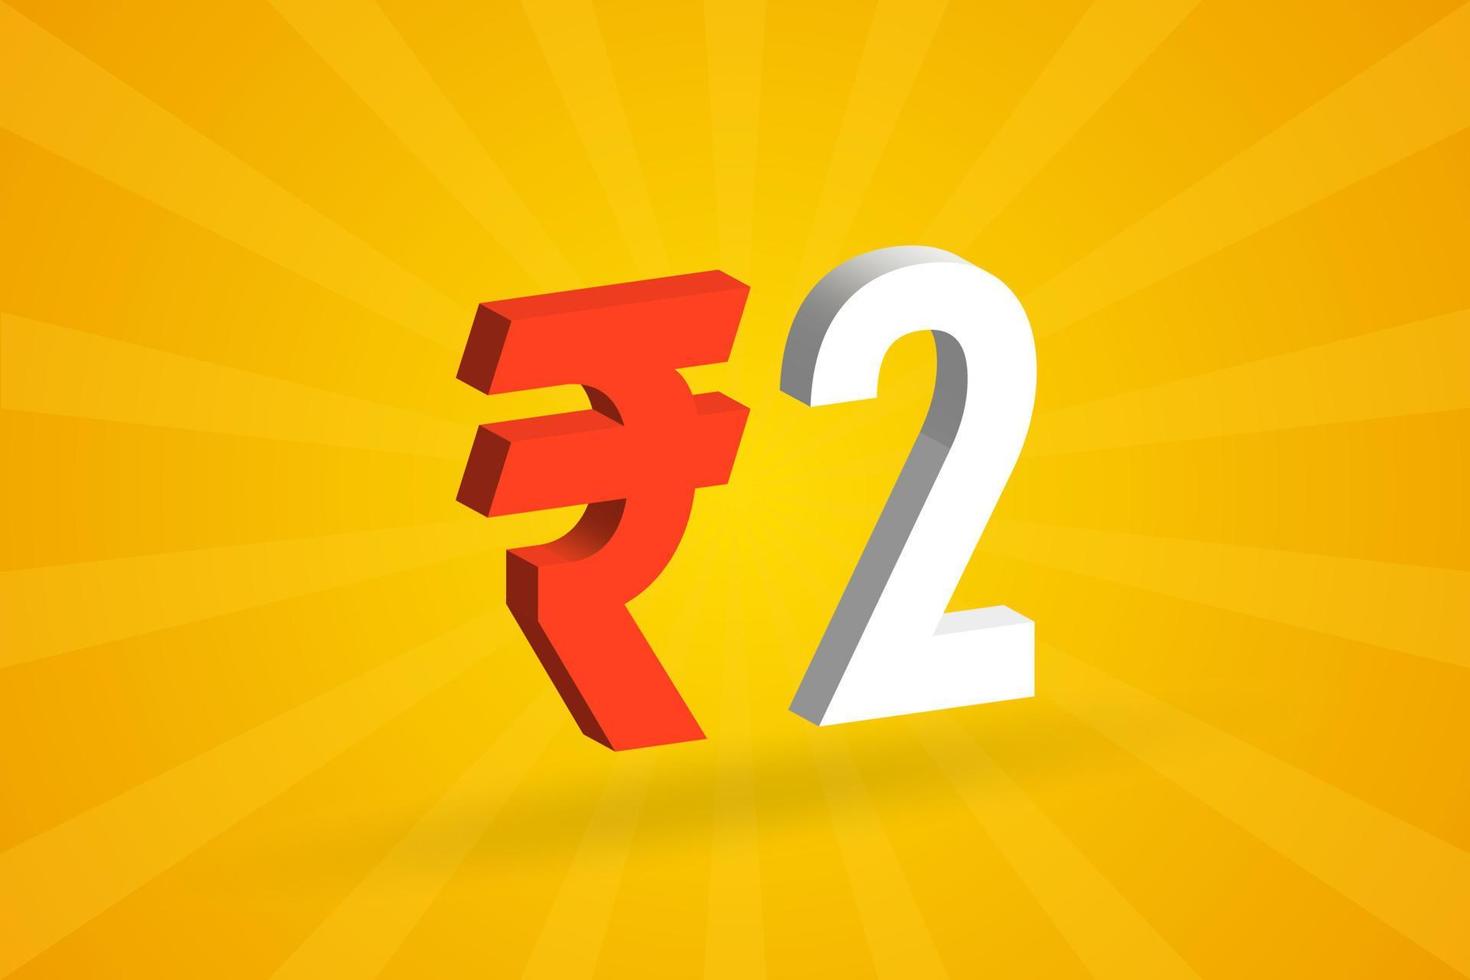 2 Rupee 3D symbol bold text vector image. 3D 2 Indian Rupee currency sign vector illustration